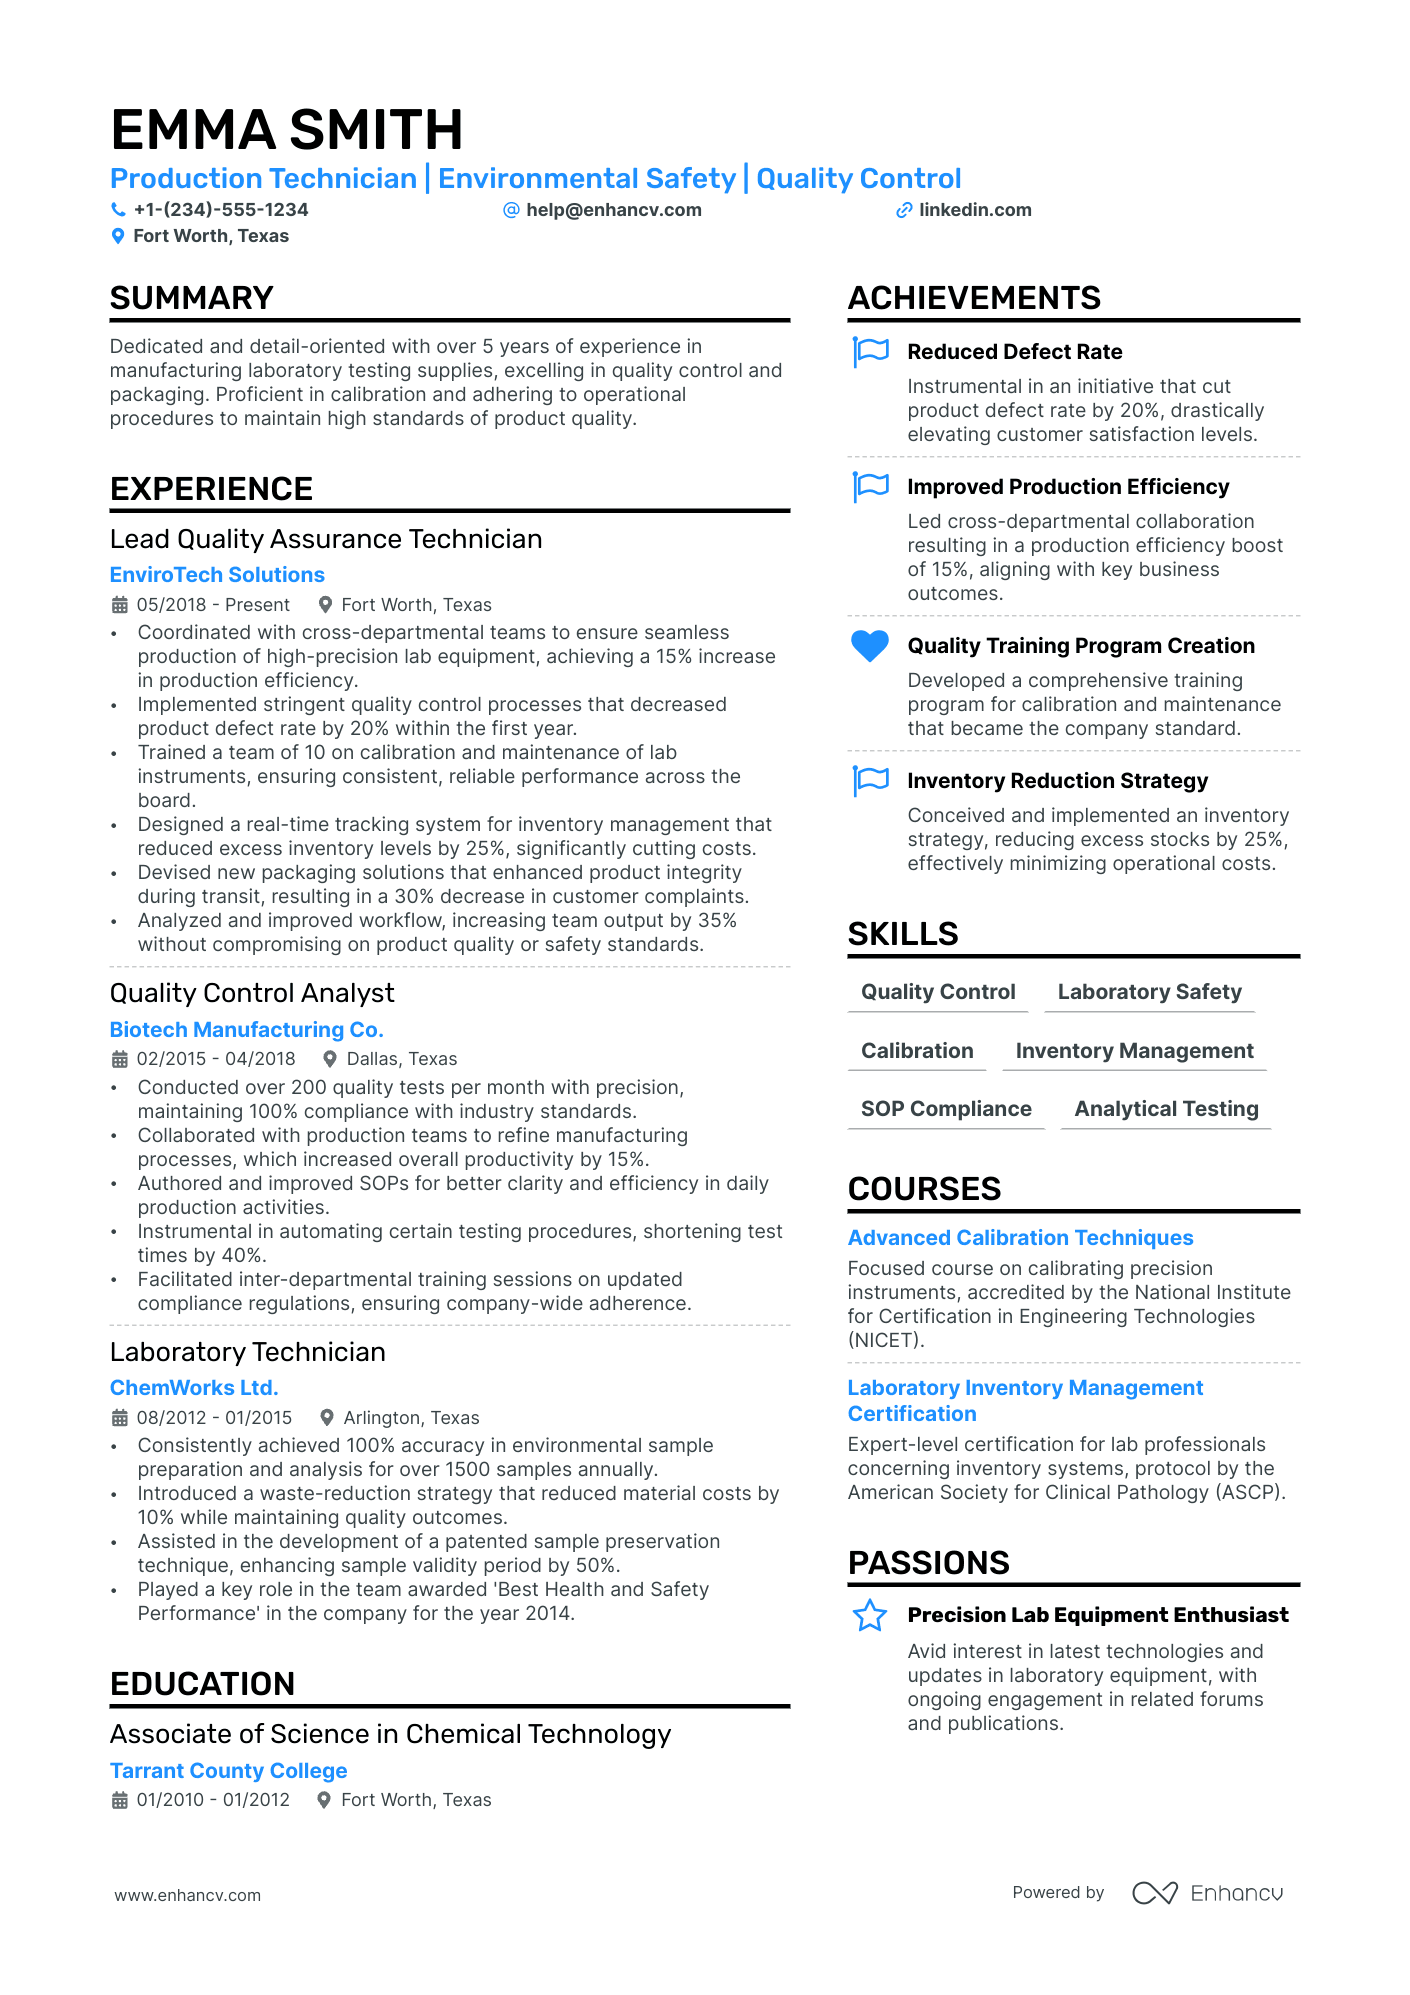 Production Technician resume example